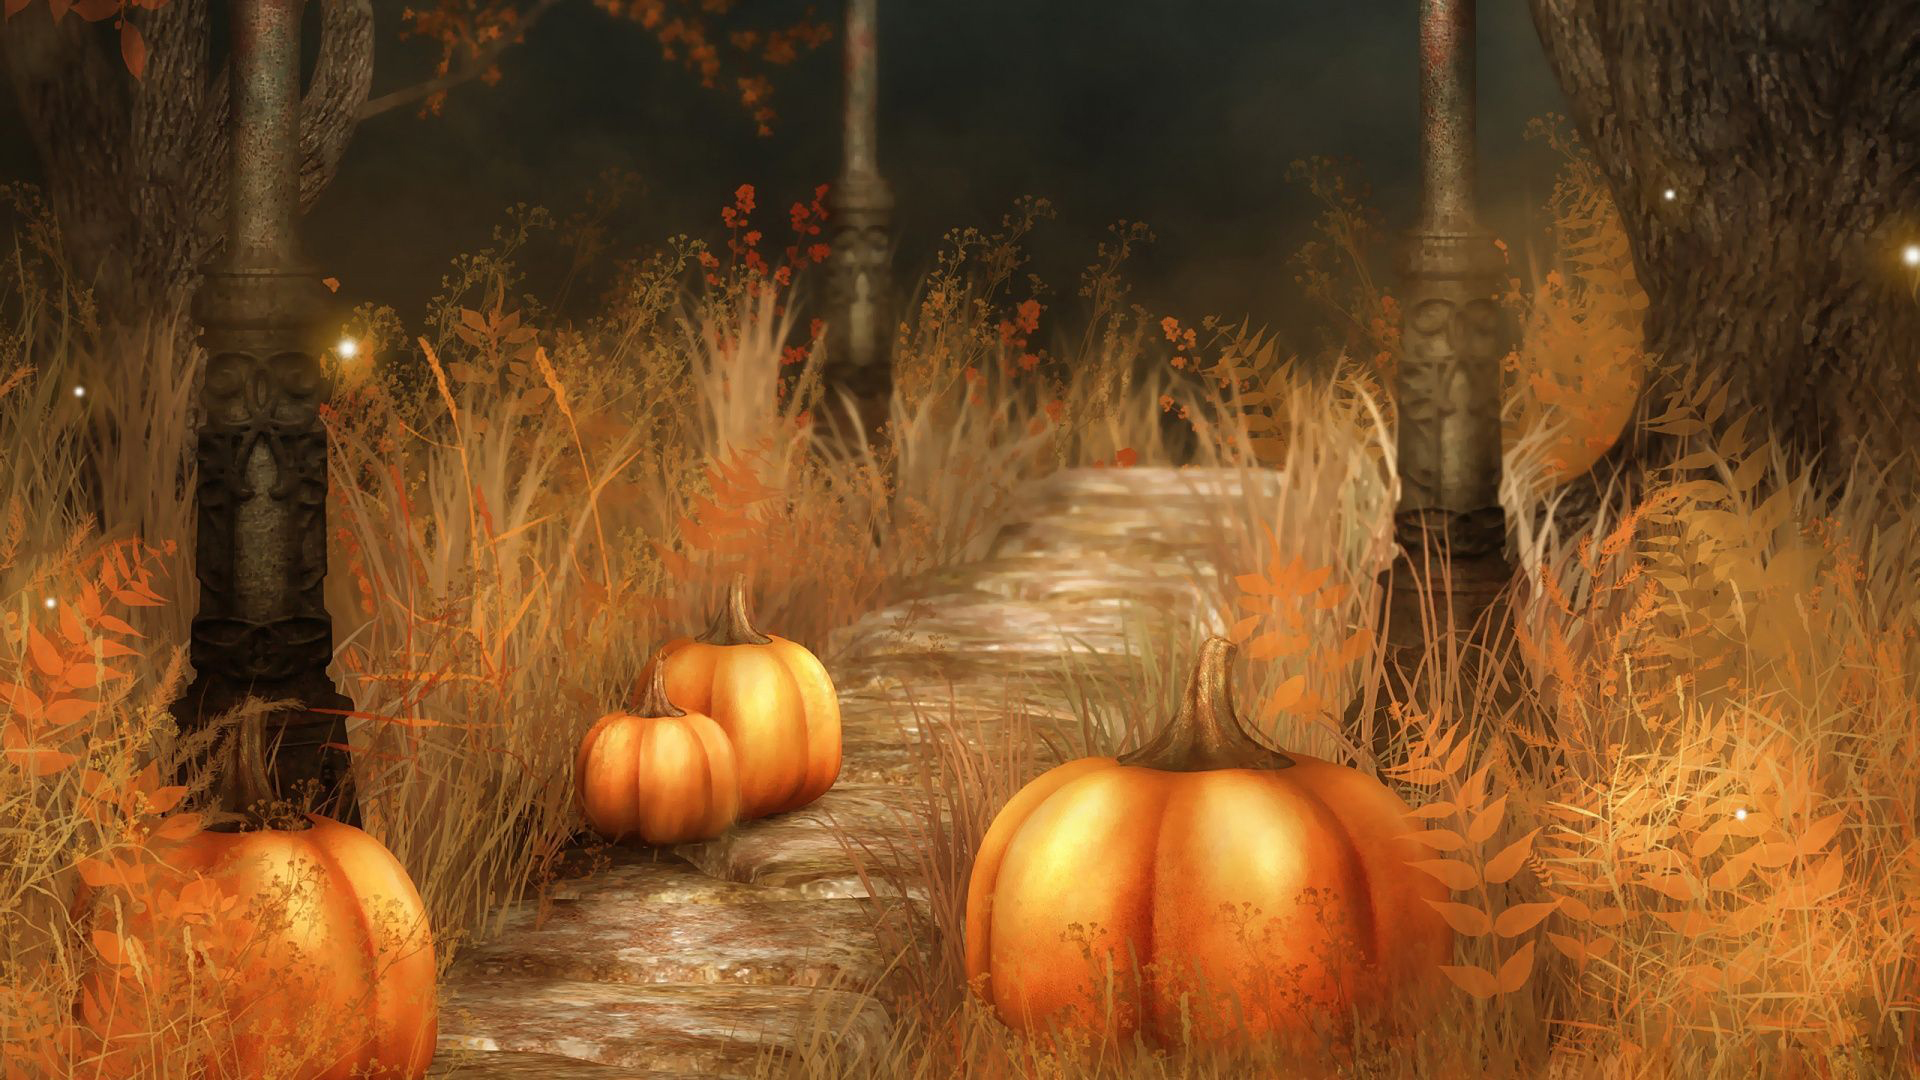 Wallpaper autumn leaves smile candles Halloween pumpkin Halloween  Autumn pumpkin images for desktop section праздники  download